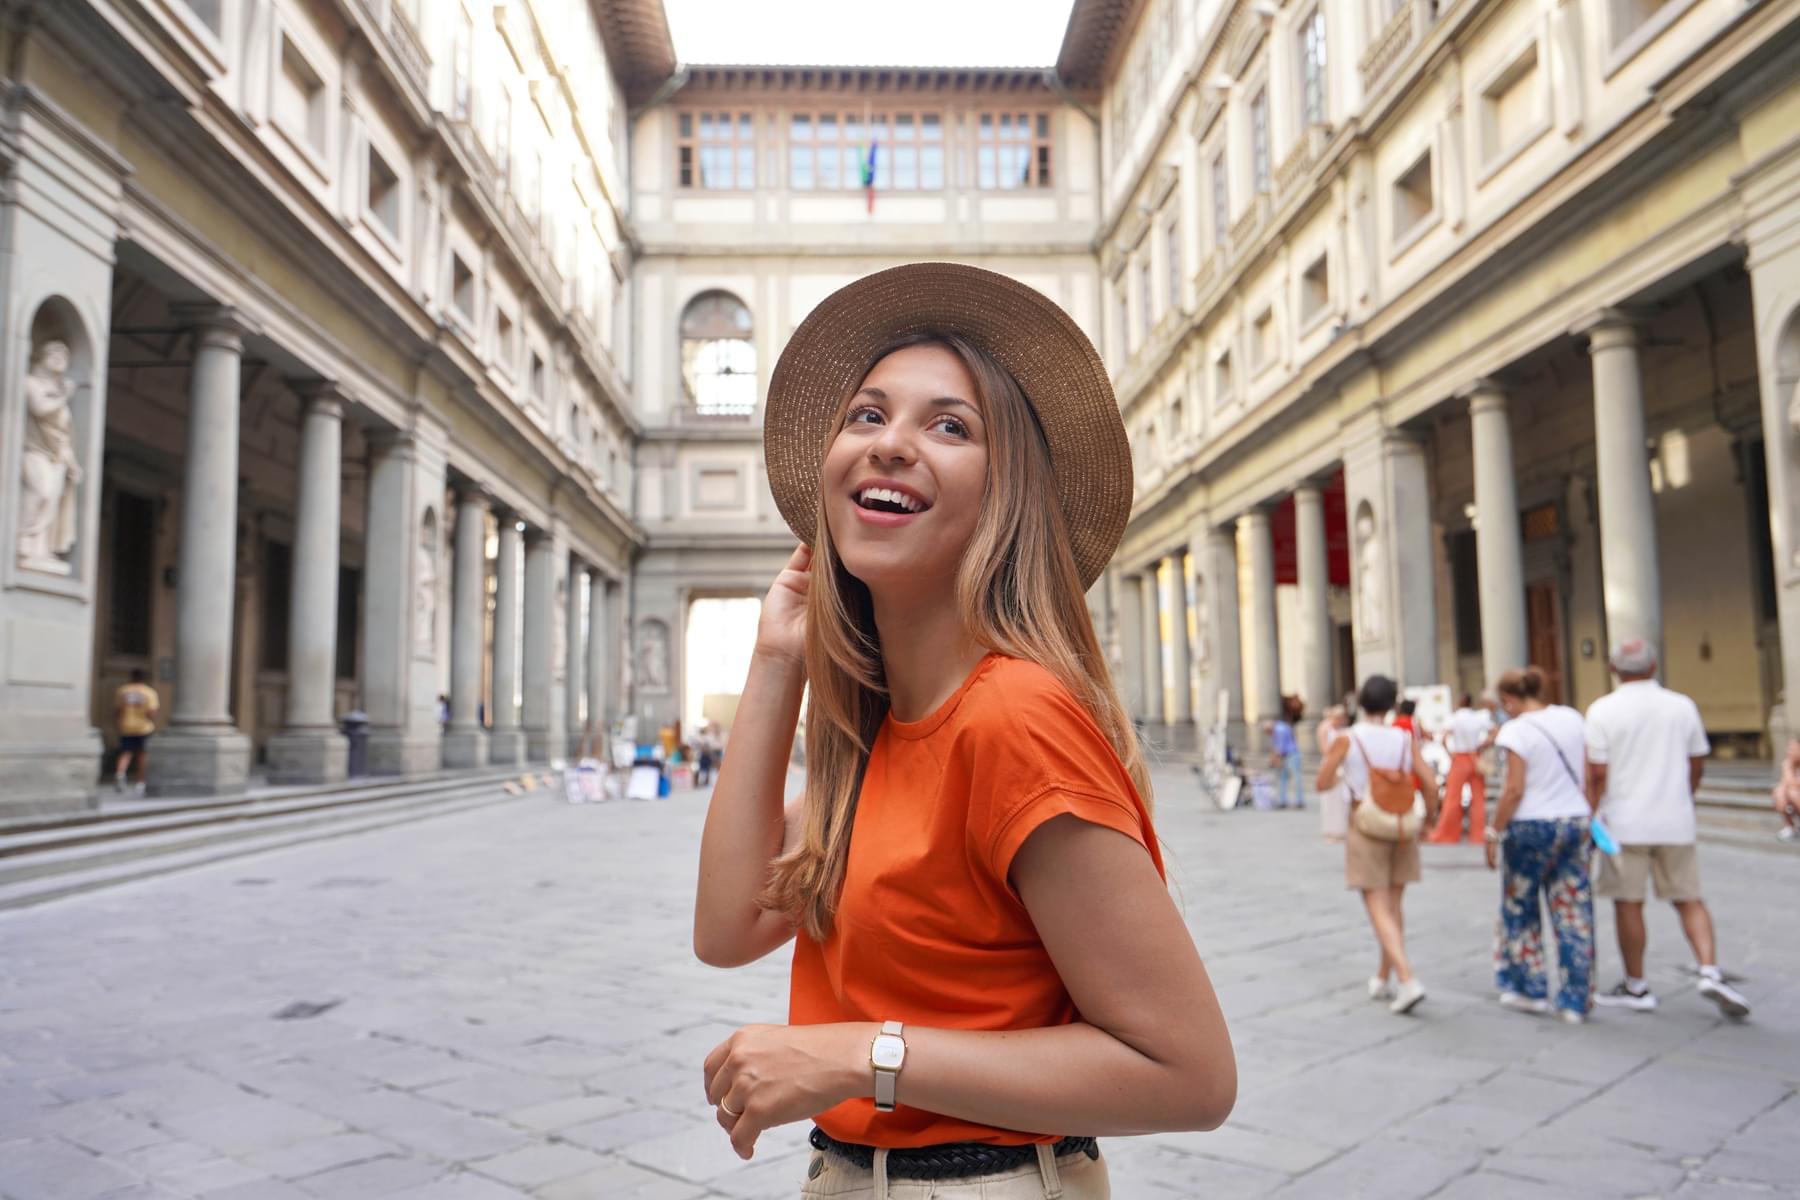 More Than 15 Million Tourists Explore Florence Every Year